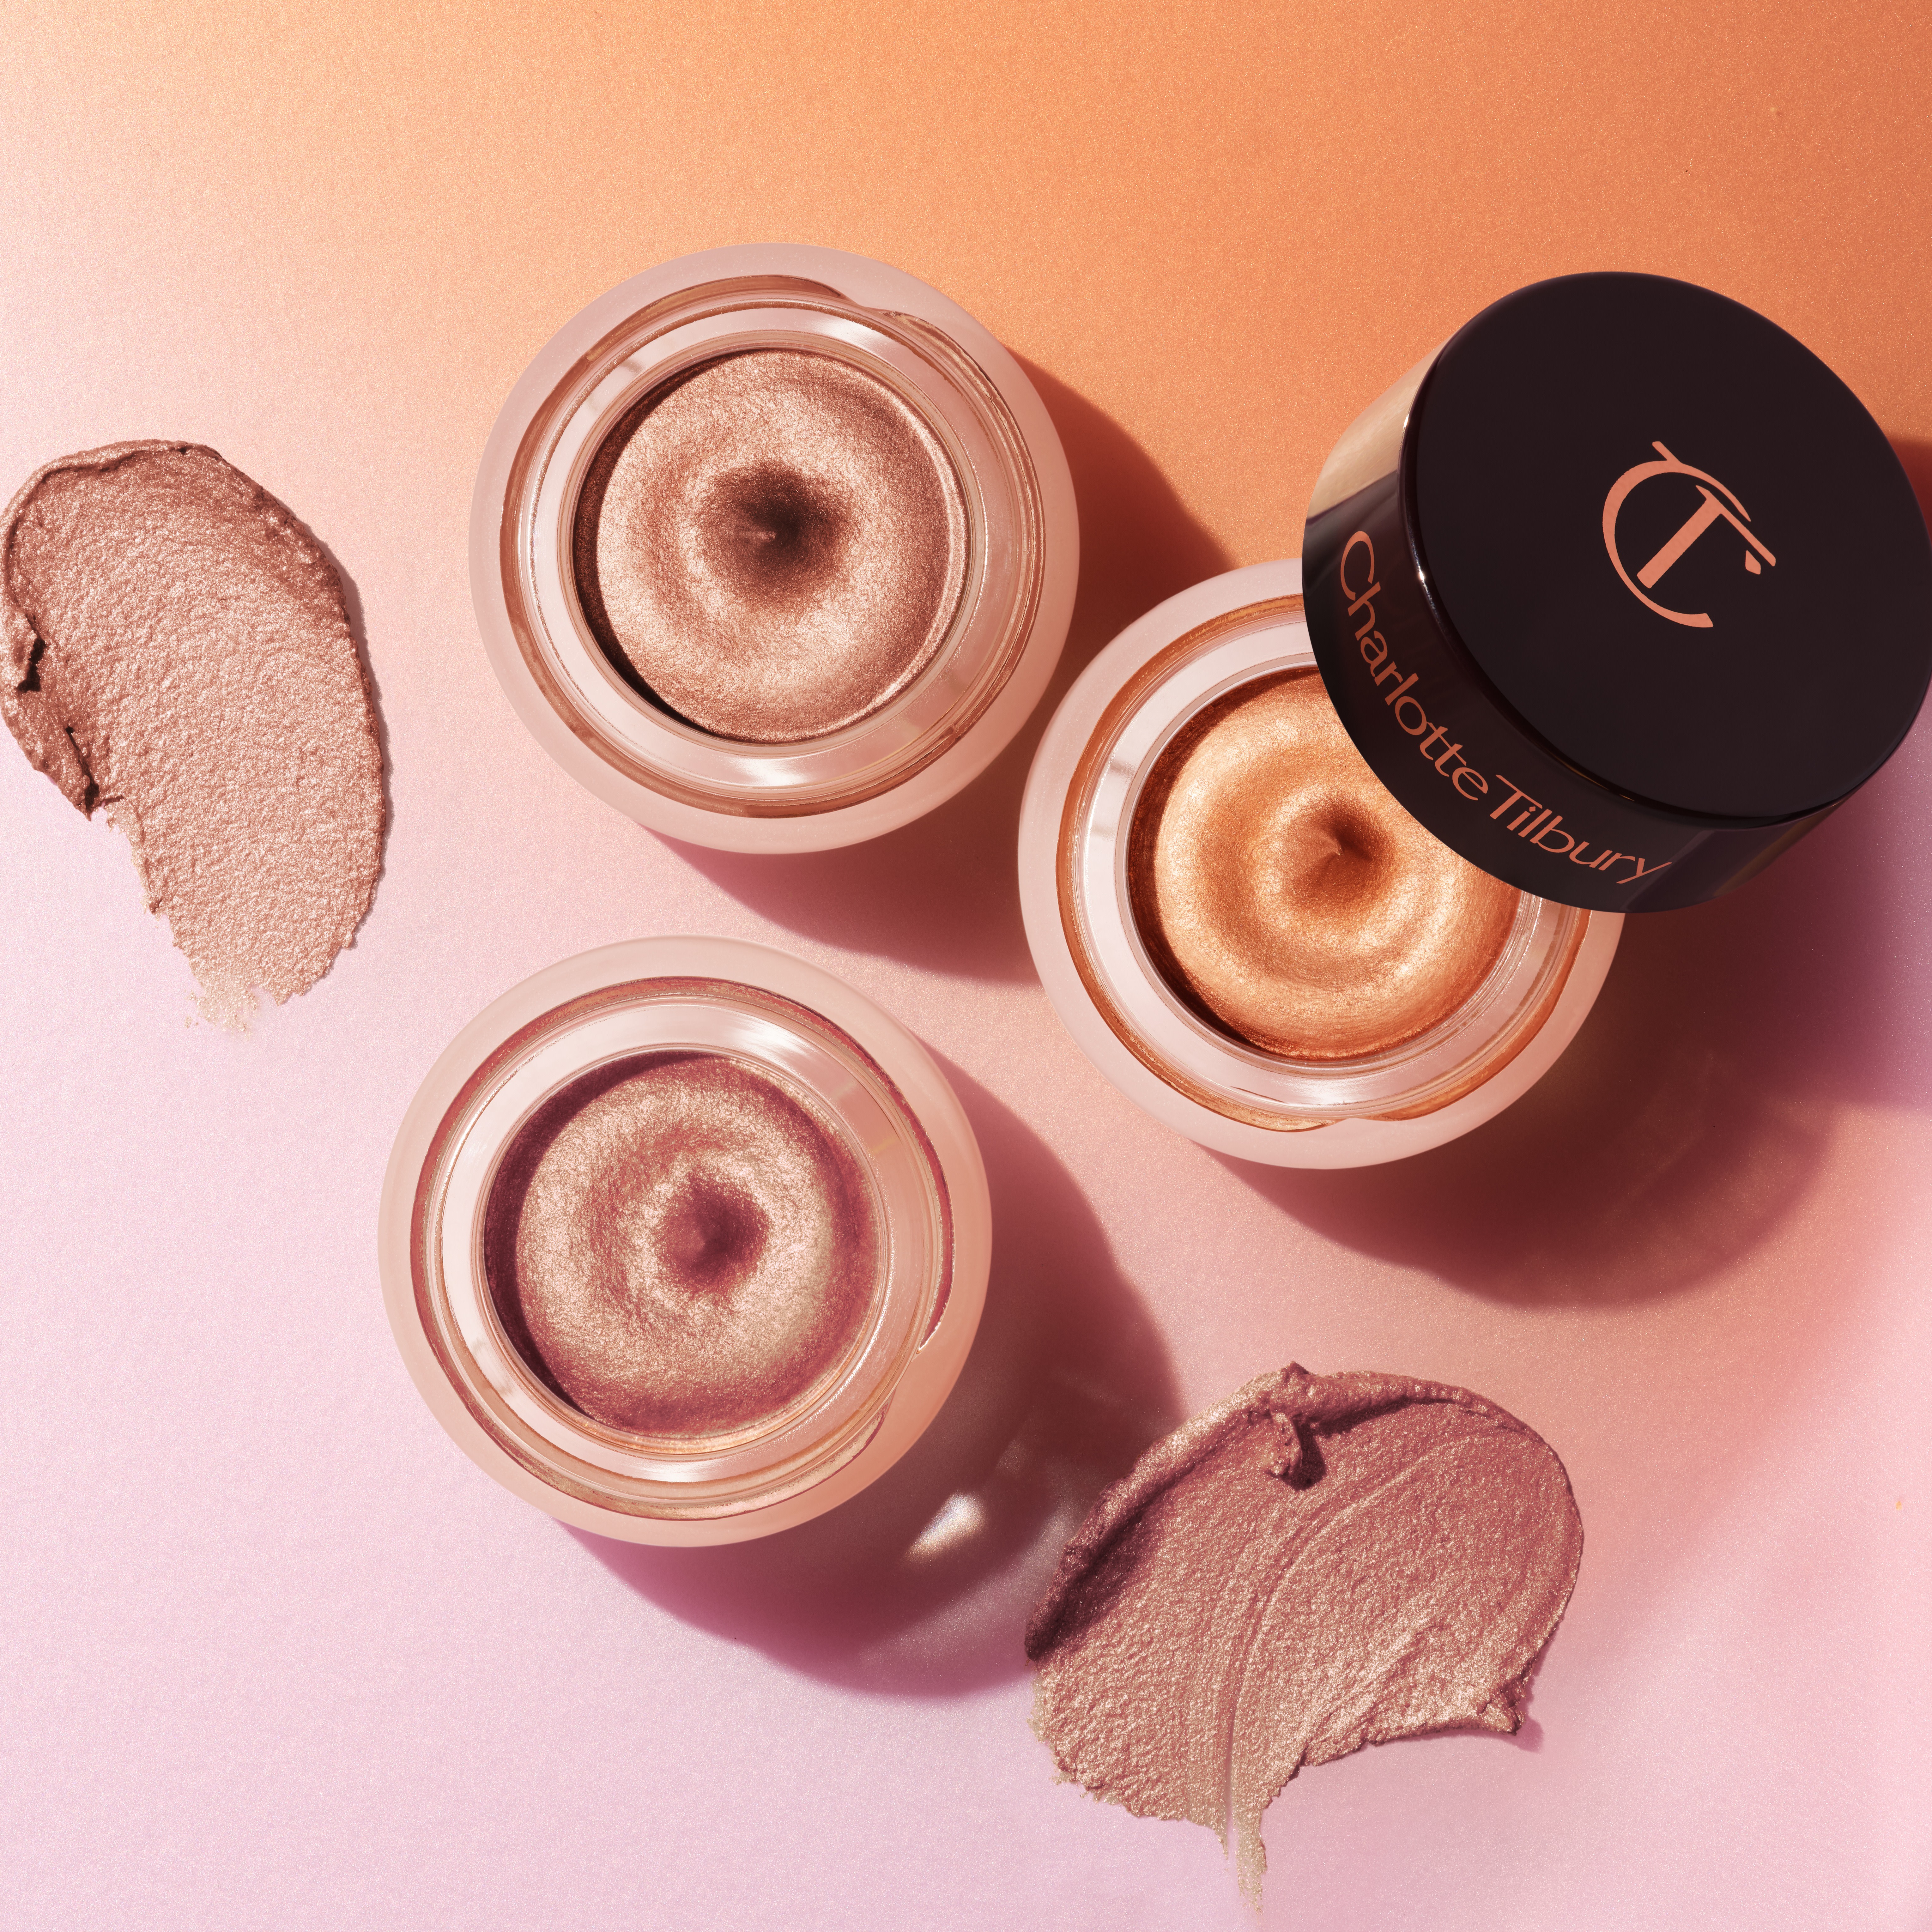 Three shades of Charlotte's Eyes to Mesmerise shimmering cream eyeshadows perfect for simple eye makeup looks